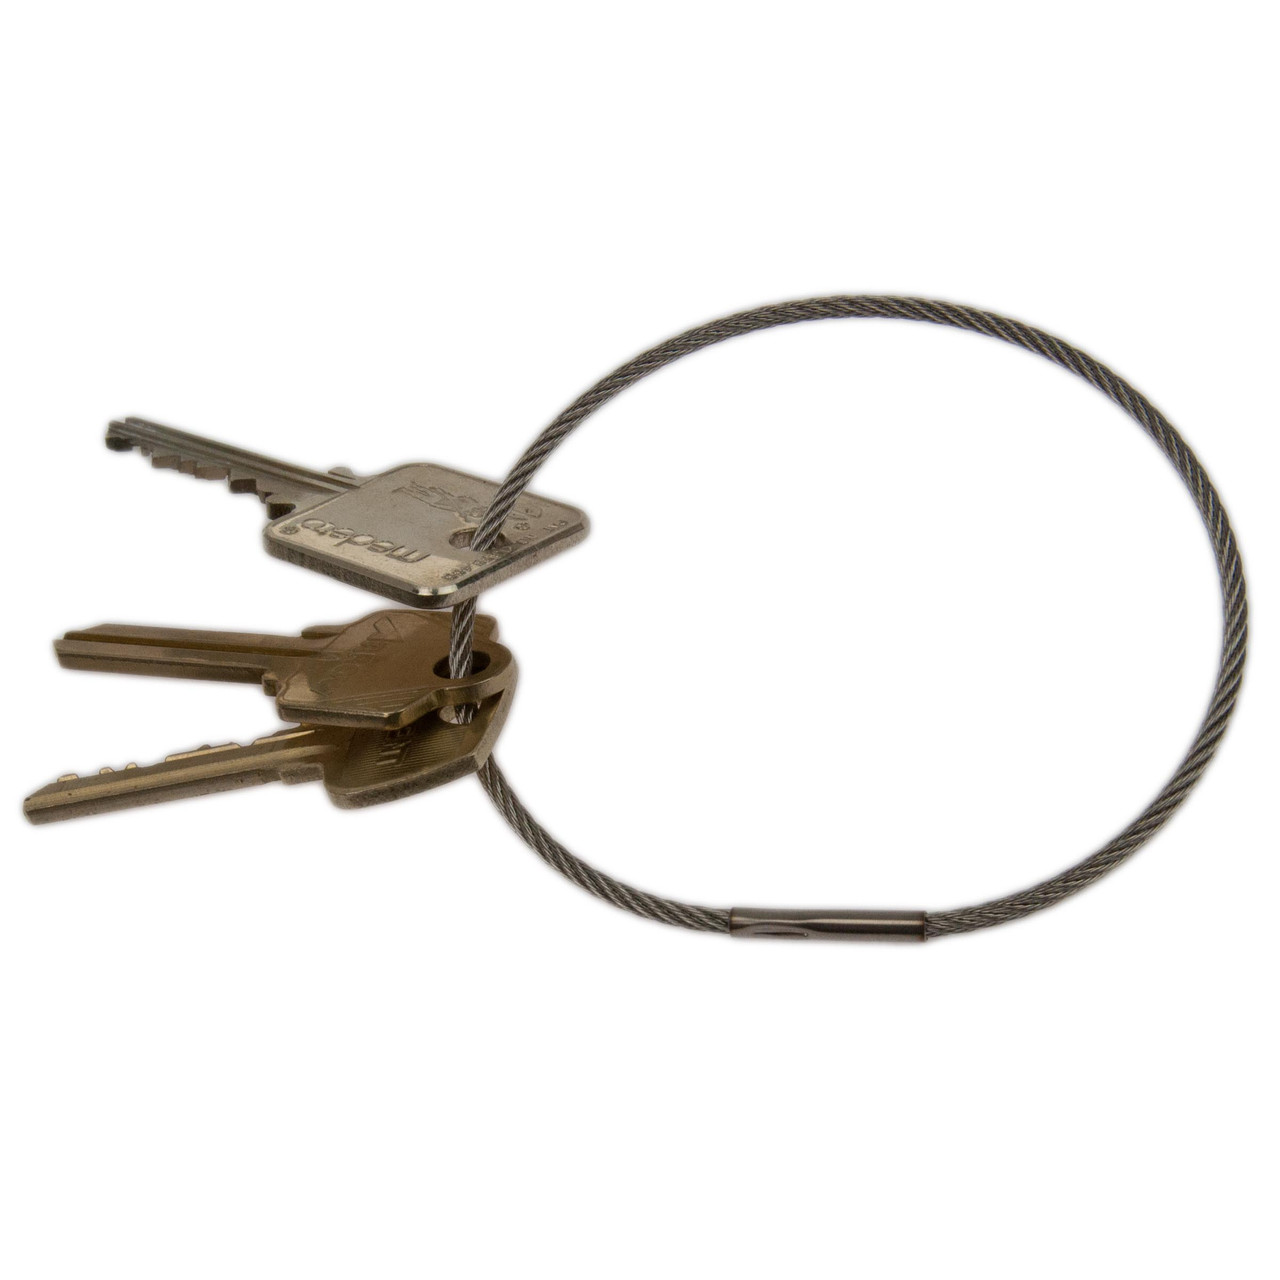 3 Inch Diameter Stainless Steel Crimp Close Permanent Cable Key Ring